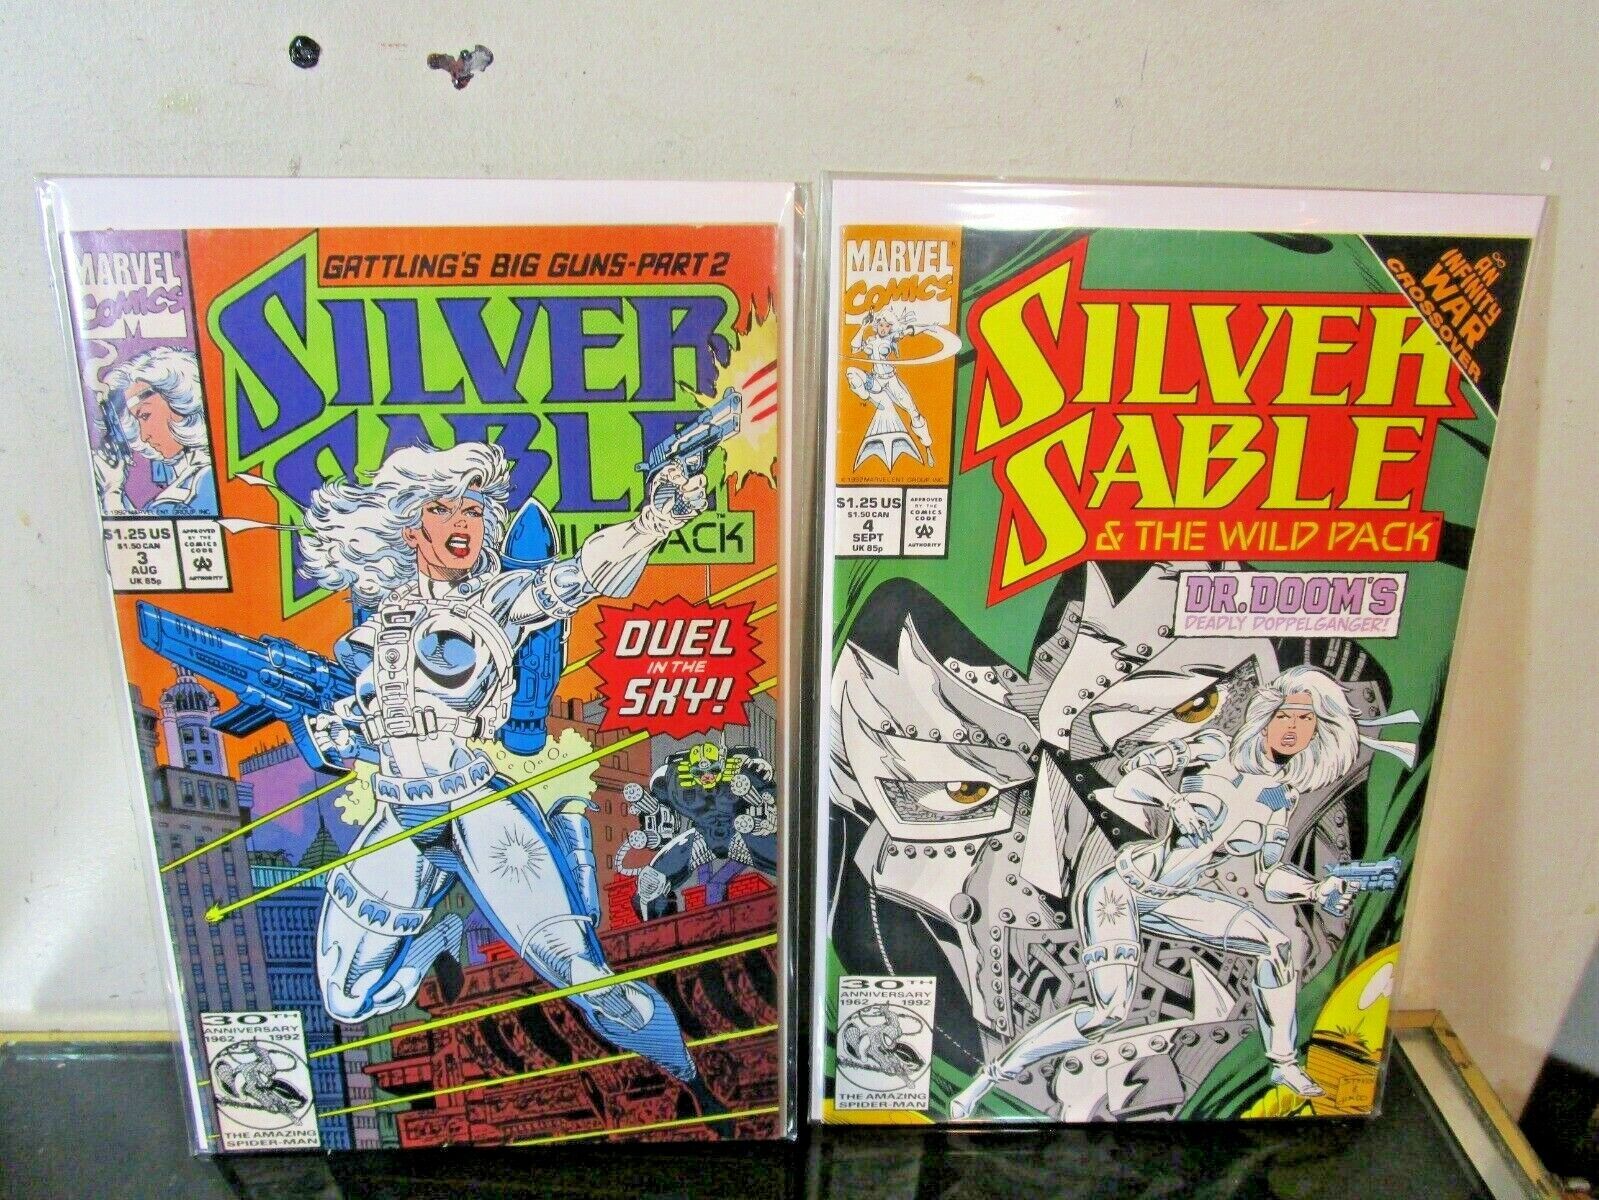 Silver Sable AND The Wild Pack #3-4 Marvel 1992 BAGGED BOARDED~